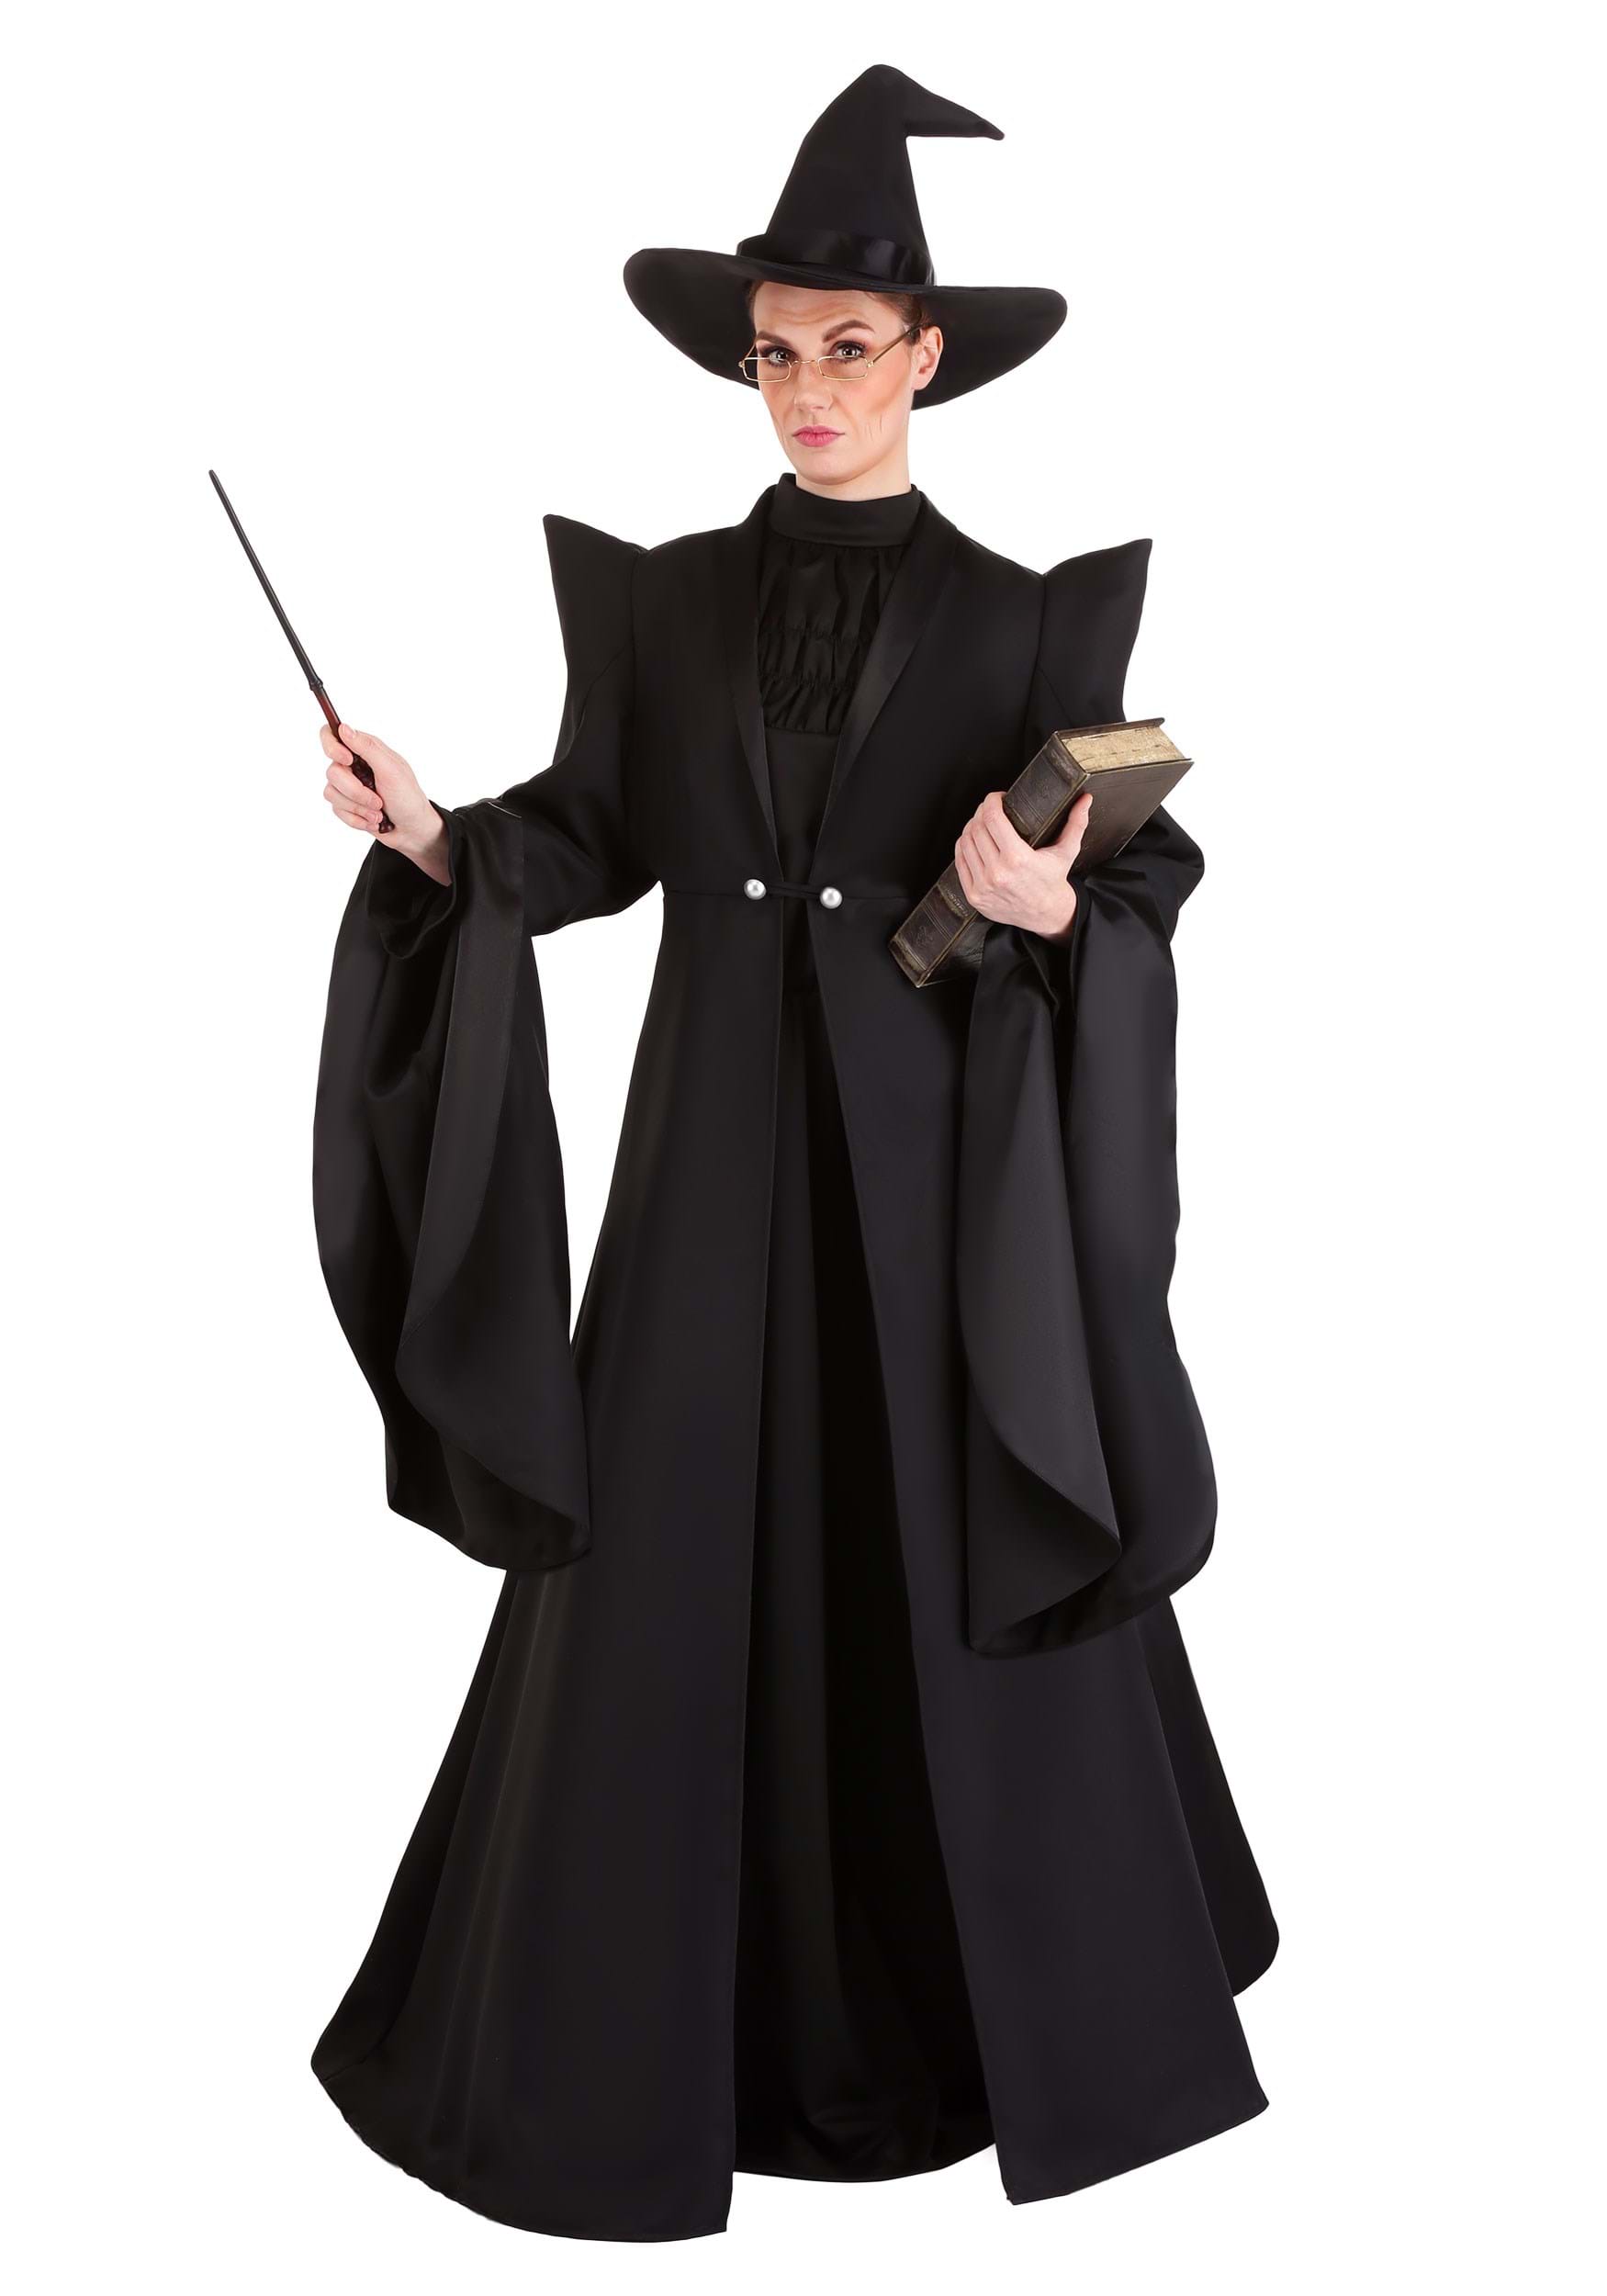 https://images.fun.com/products/64165/2-1-161329/womens-deluxe-harry-potter-mcgonagall-costume.jpg